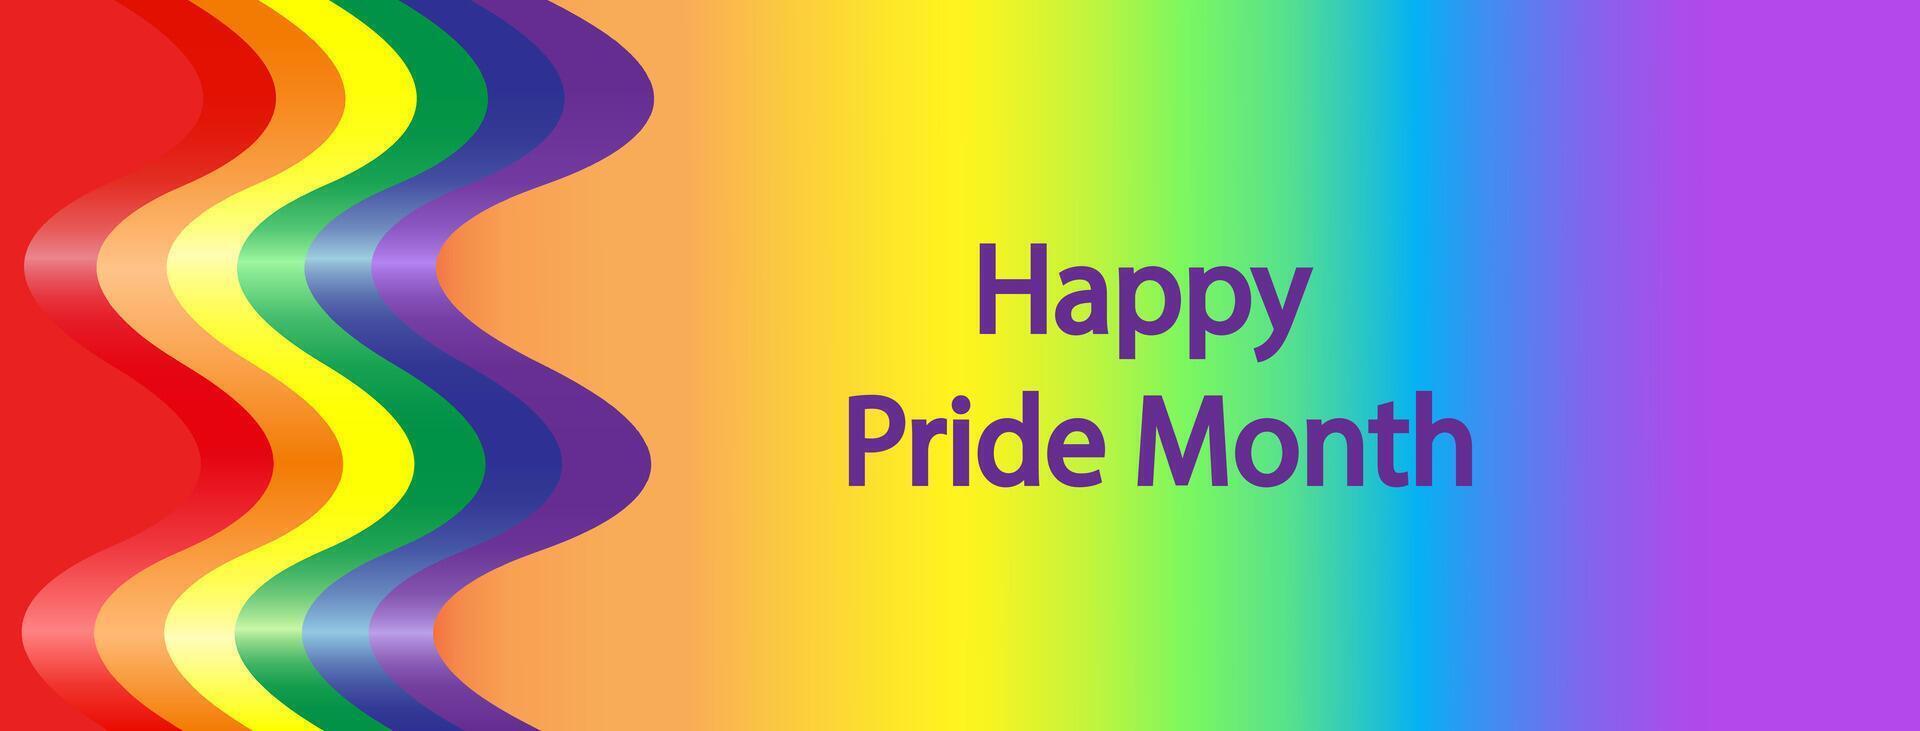 LGBTQ pride month banner. Rainbow PRIDE month with festival parades, parties and social events. Colorful rainbow flag. design template. LGBTQIA Pride Month Text. Pride flag . vector